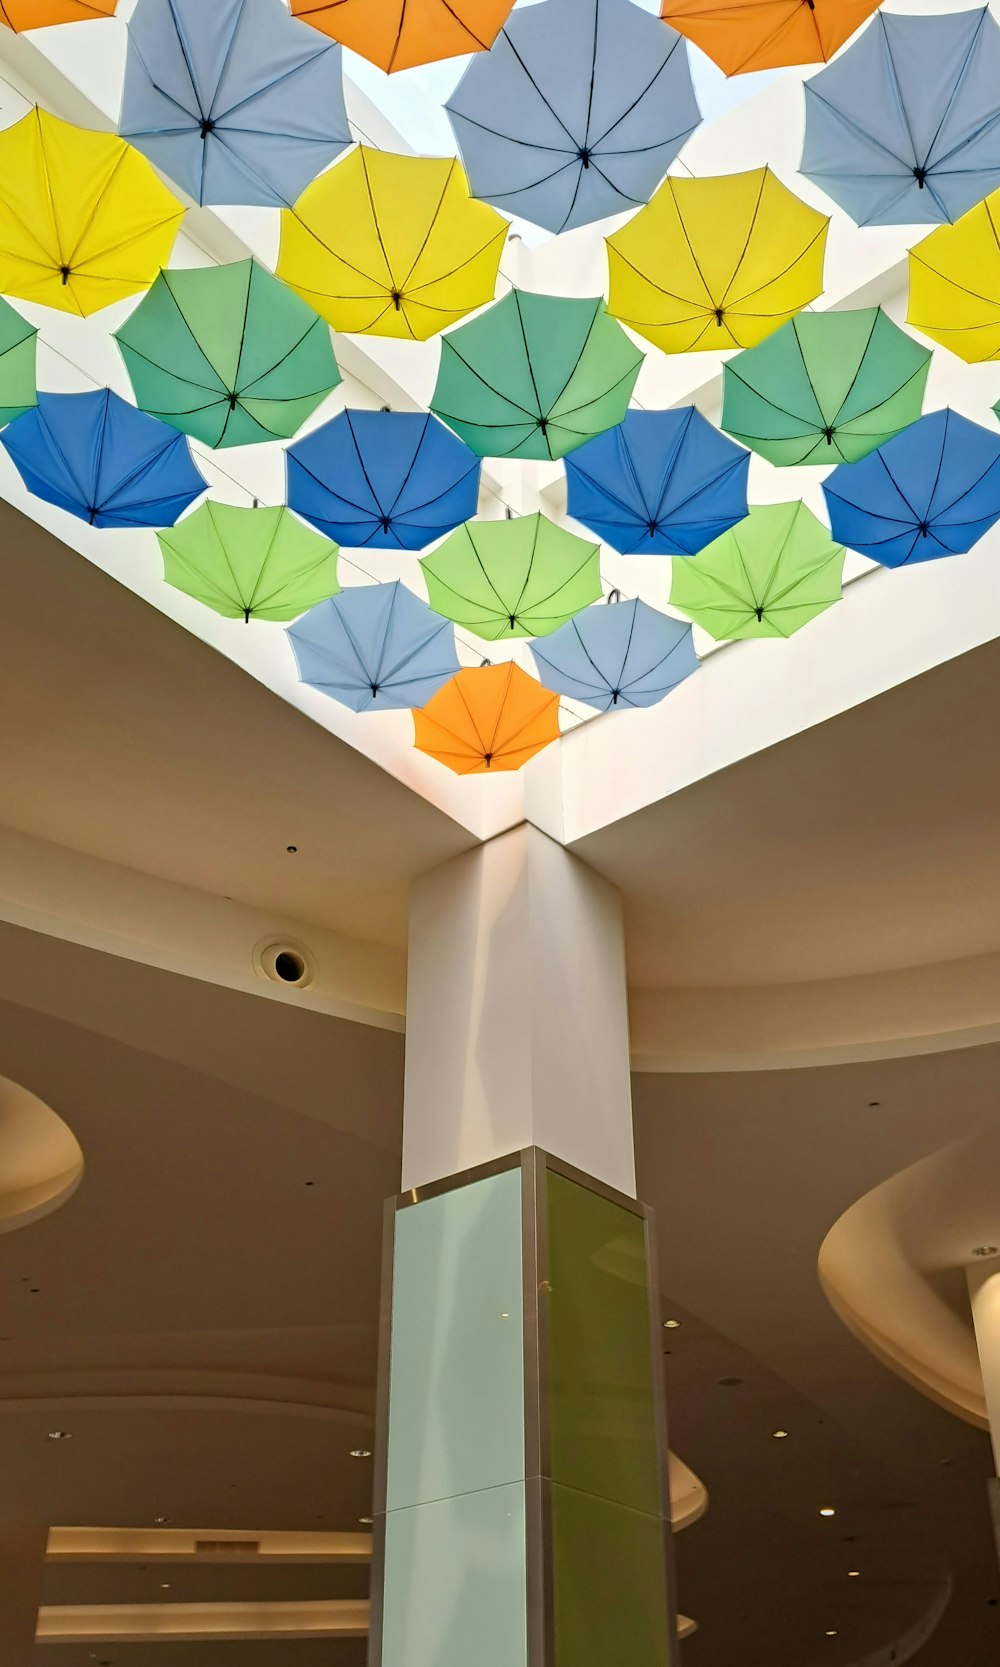 a group of colorful umbrellas hanging from the ceiling